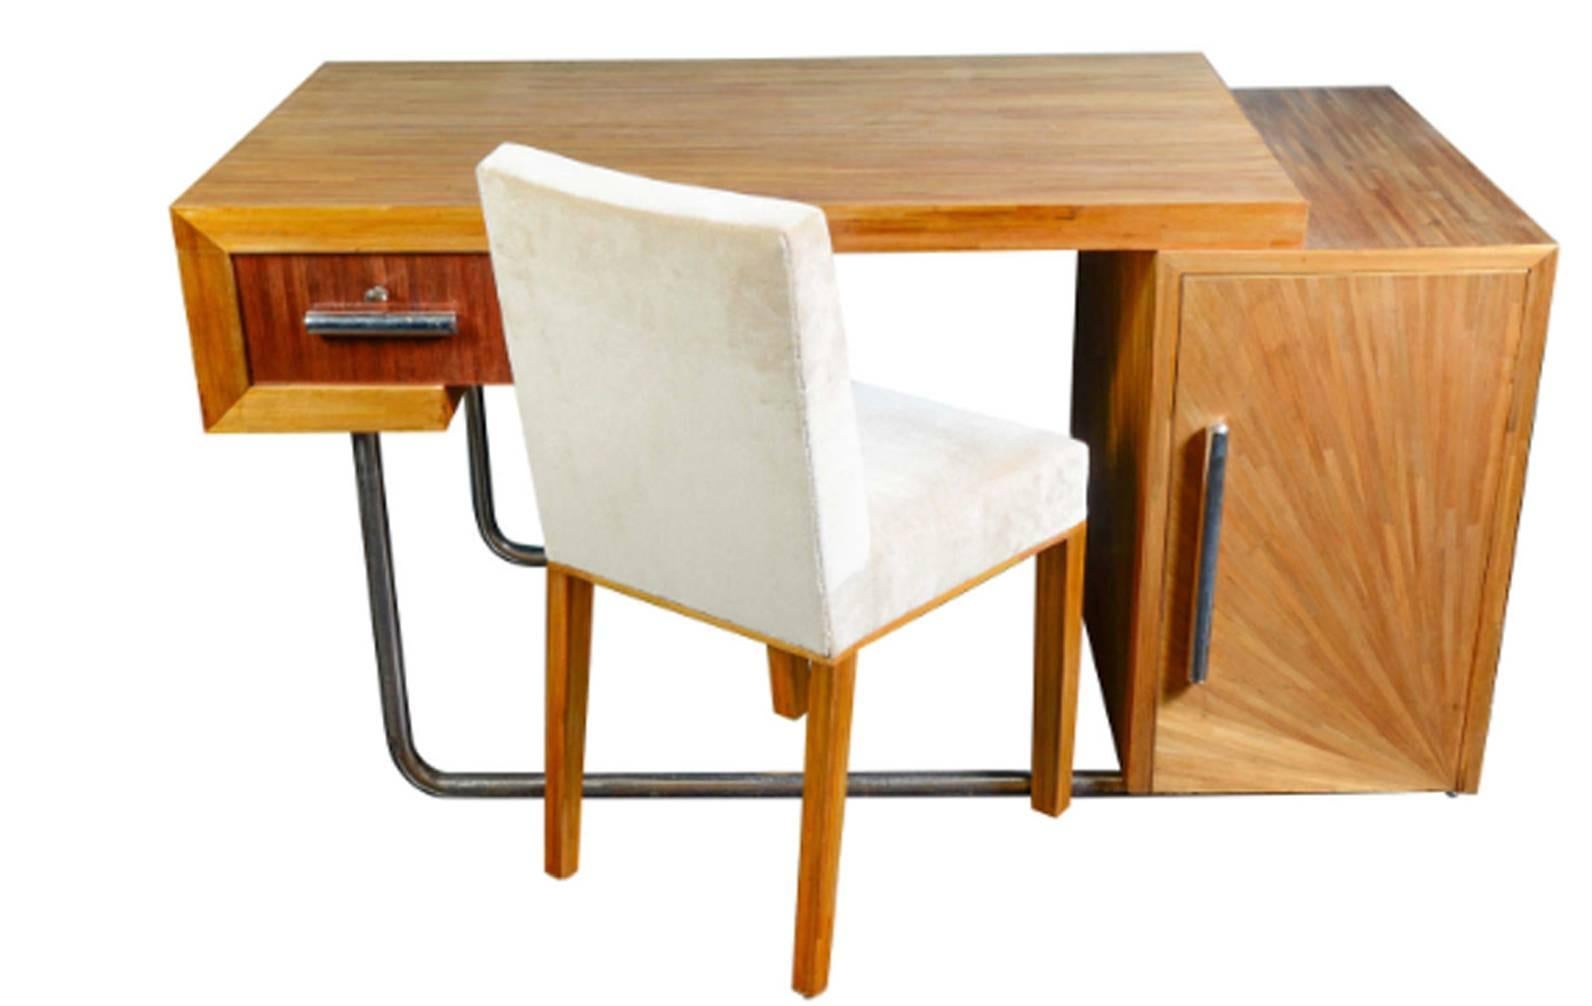 Exceptional and Sophisticated 1930 Straw Marquetry Lady Desk with its Chair by Art Déco, French Designer Blanche Klotz.
Particularity: doubled-sided.
Modernist desk chromed steel and straw marquetry.
Dimensions: H 81 x P 48 x L 44 cm.

This